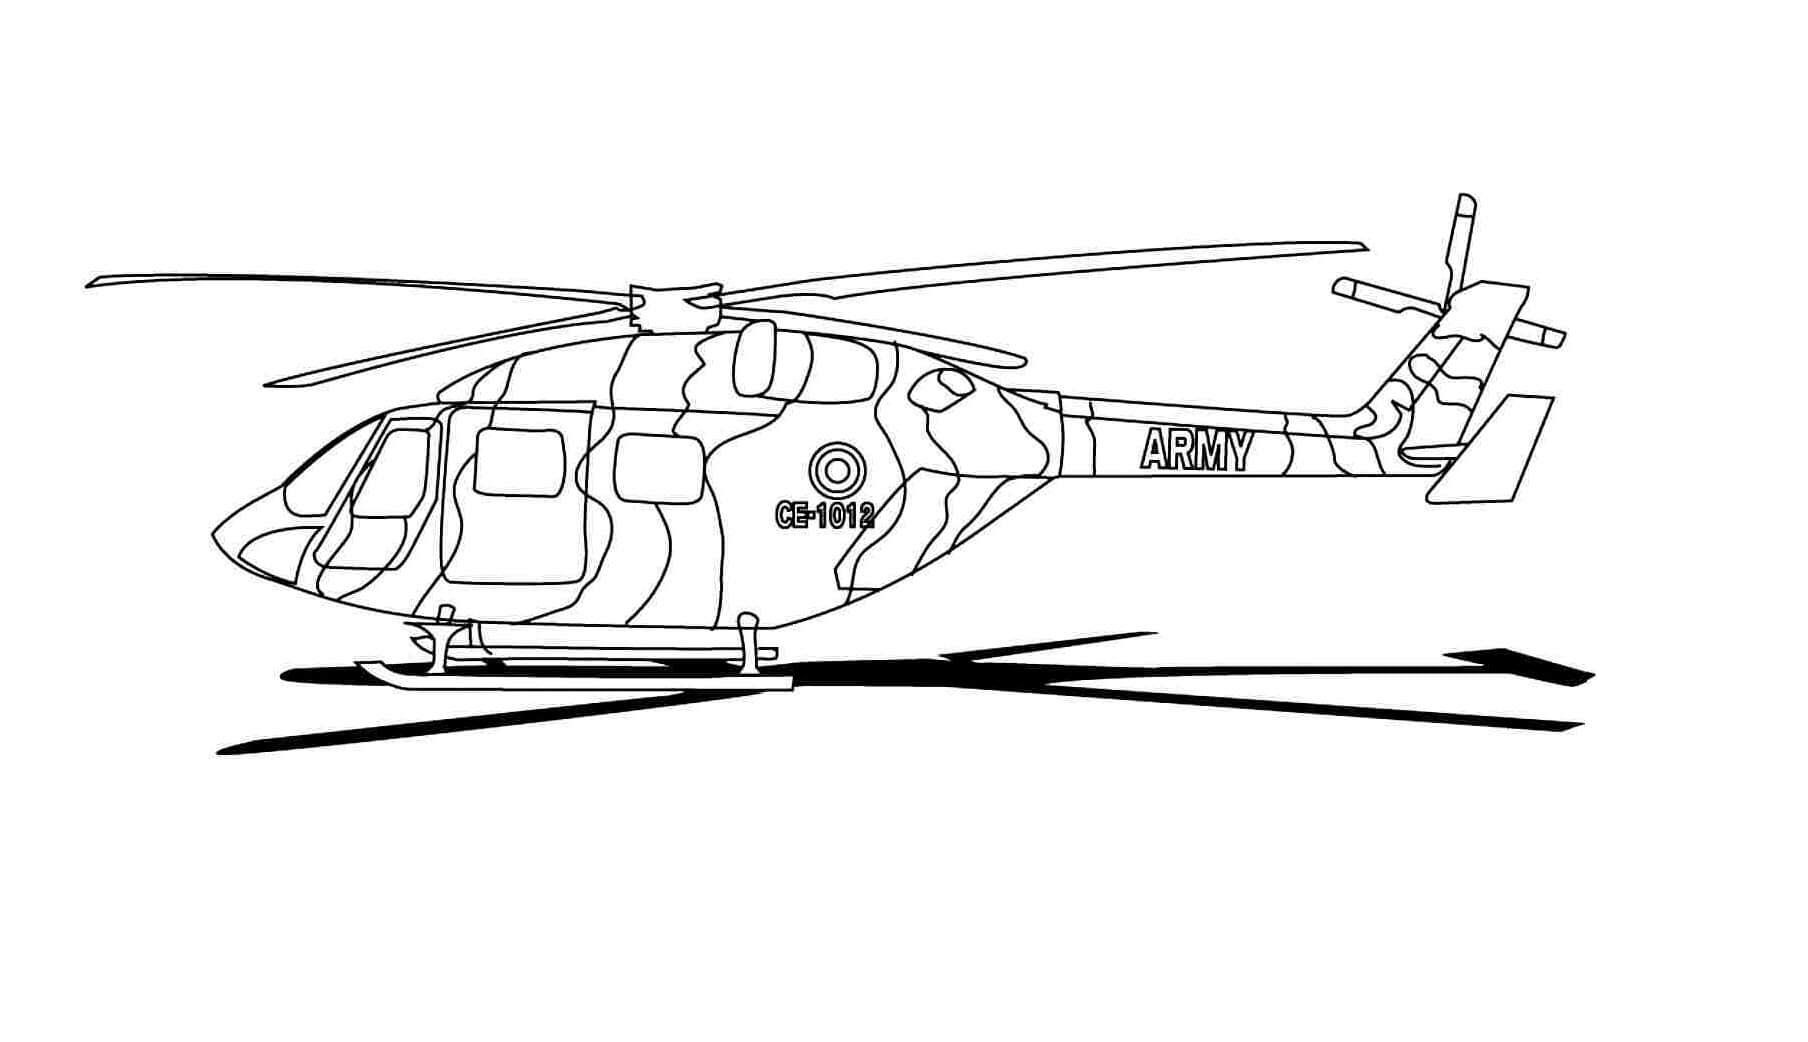 Army Helicopter CE 1012 Coloring Page